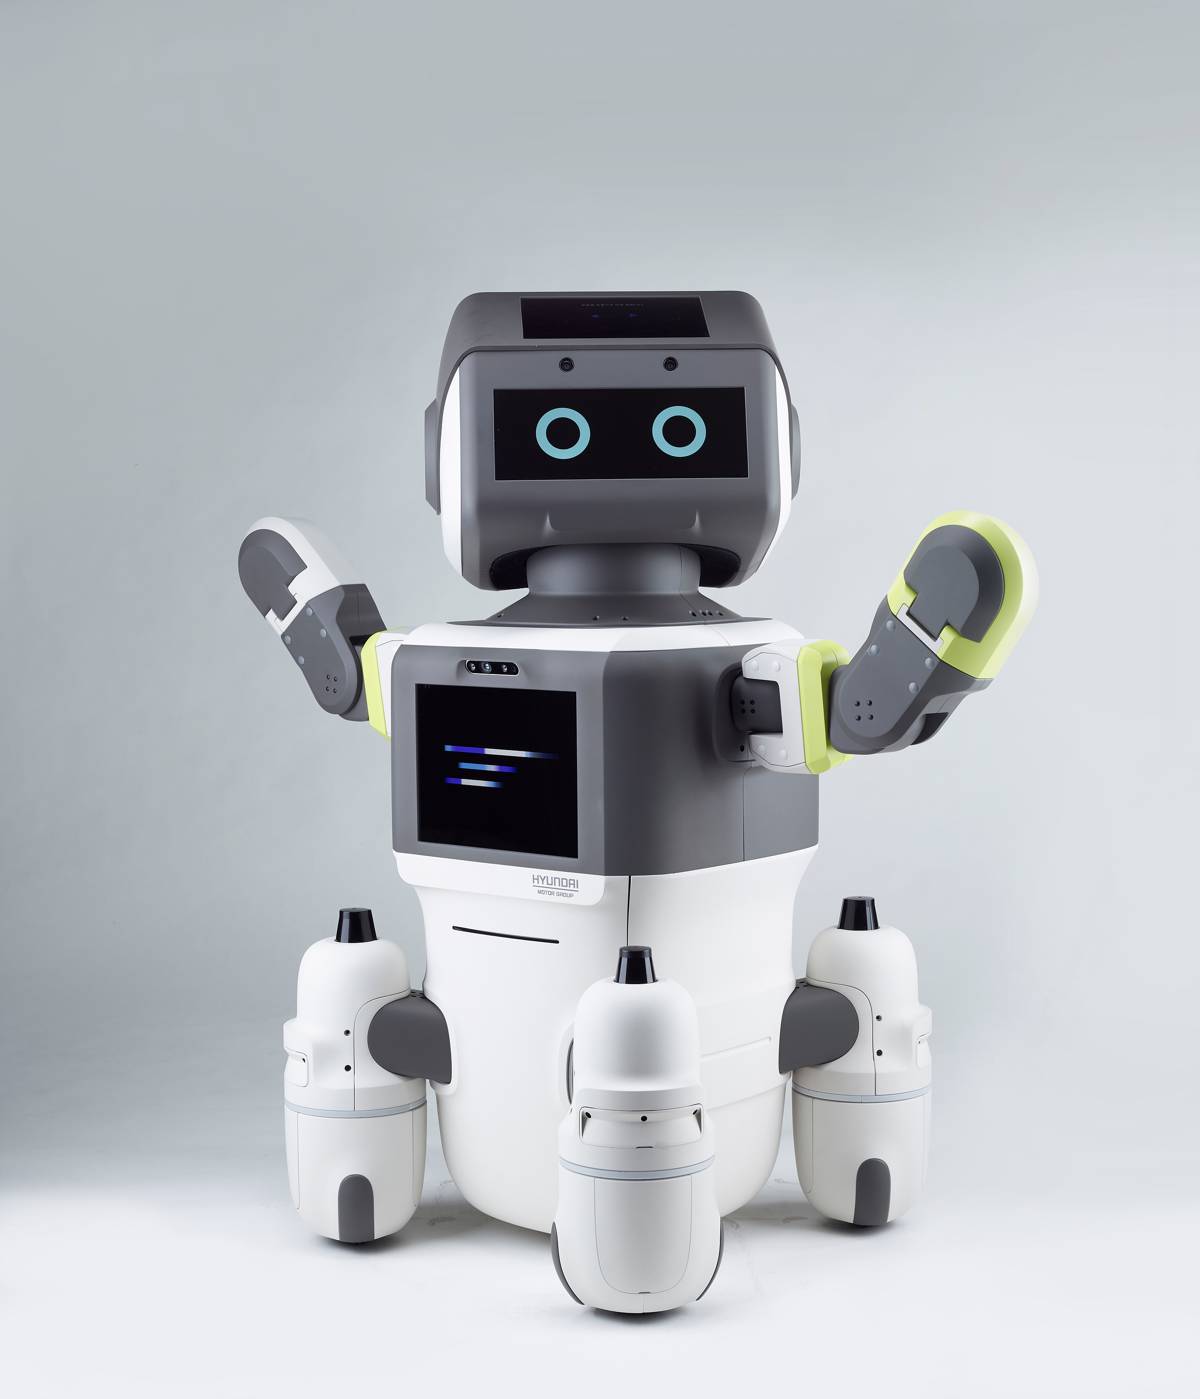 Hyundai introduces Humanoid Robot for automated customer service